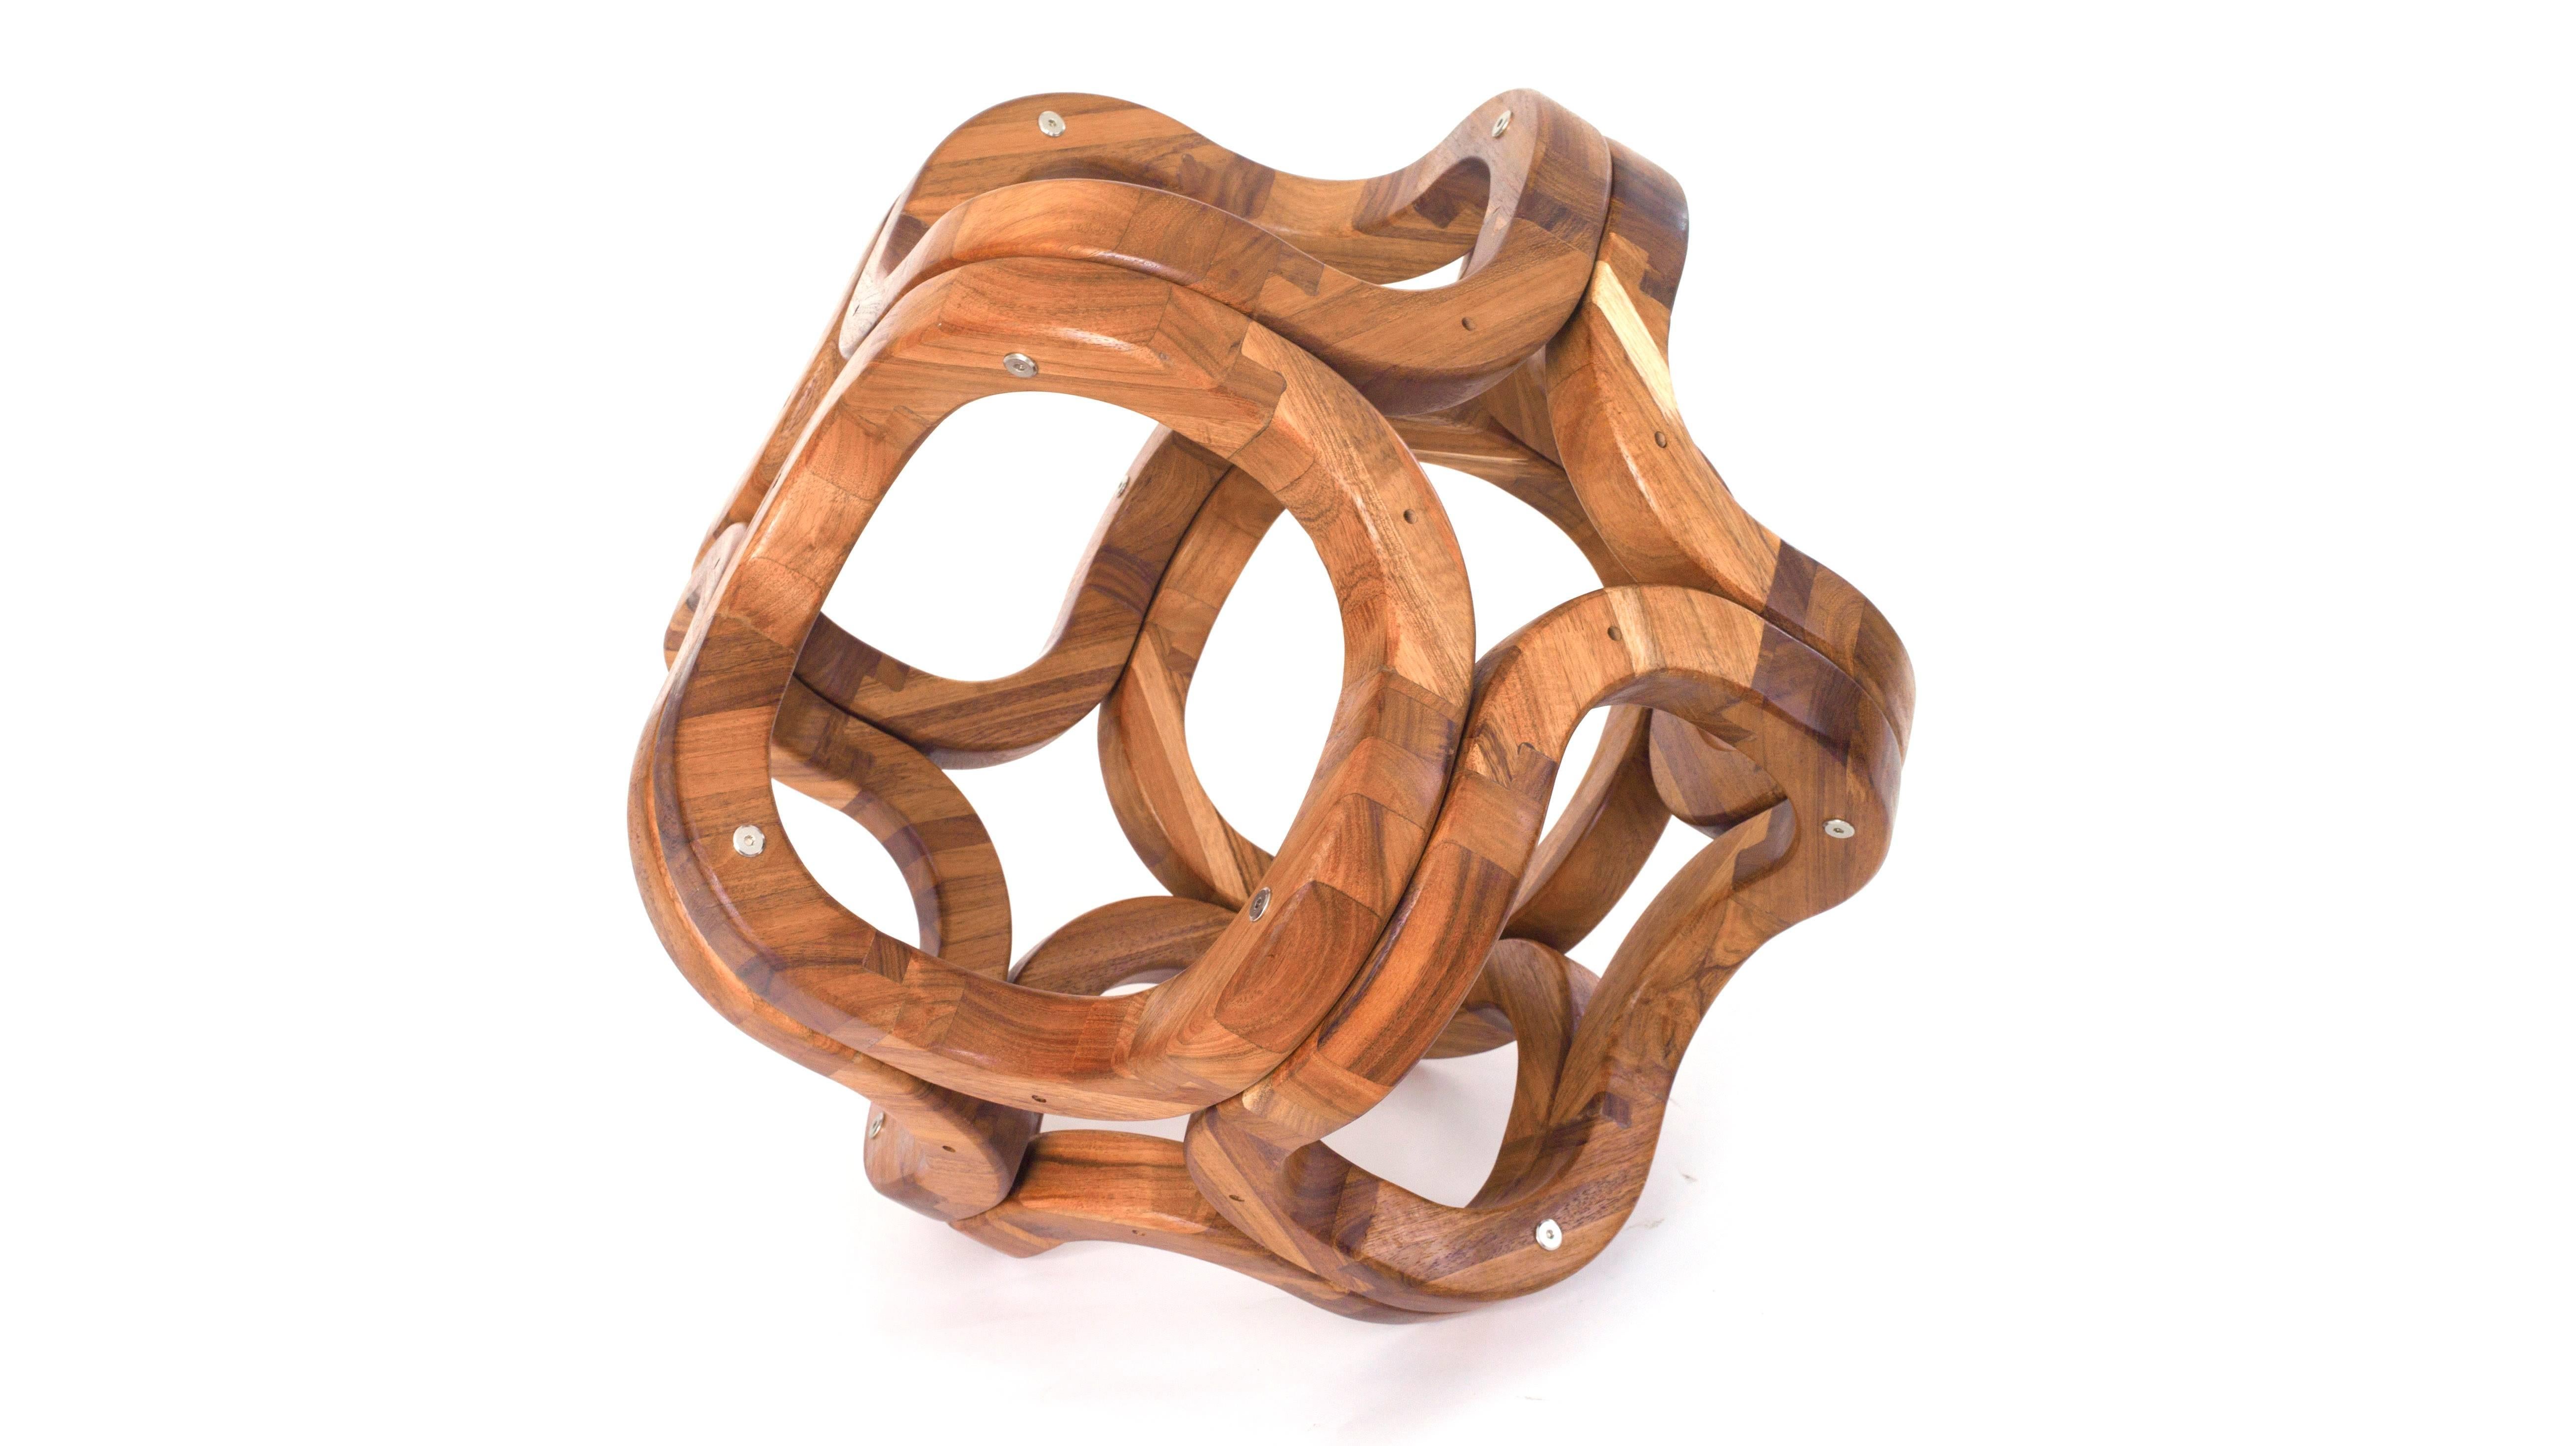 Contemporary Mexican Sculpture in Handcrafted Tzalam Wood Geometric Octahedron  2